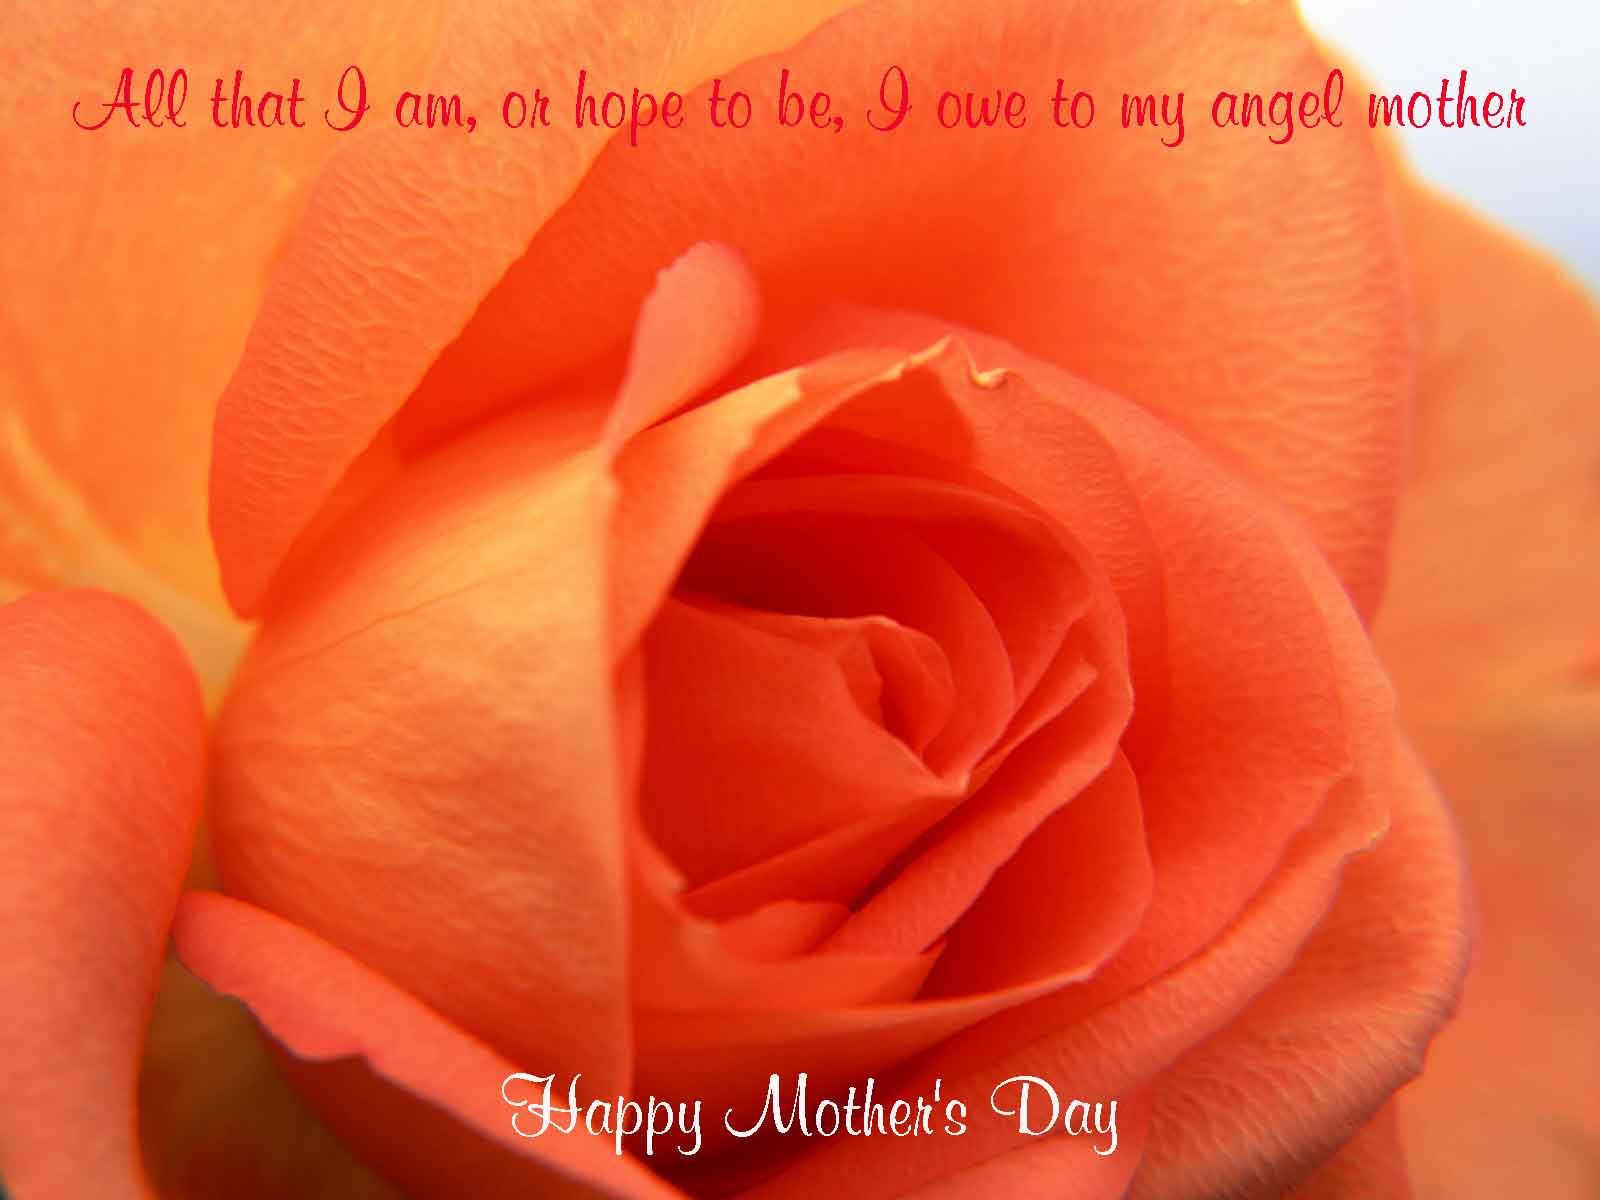 Mothers Day Beautiful Quotes Wallpaper. Cool Christian Wallpaper